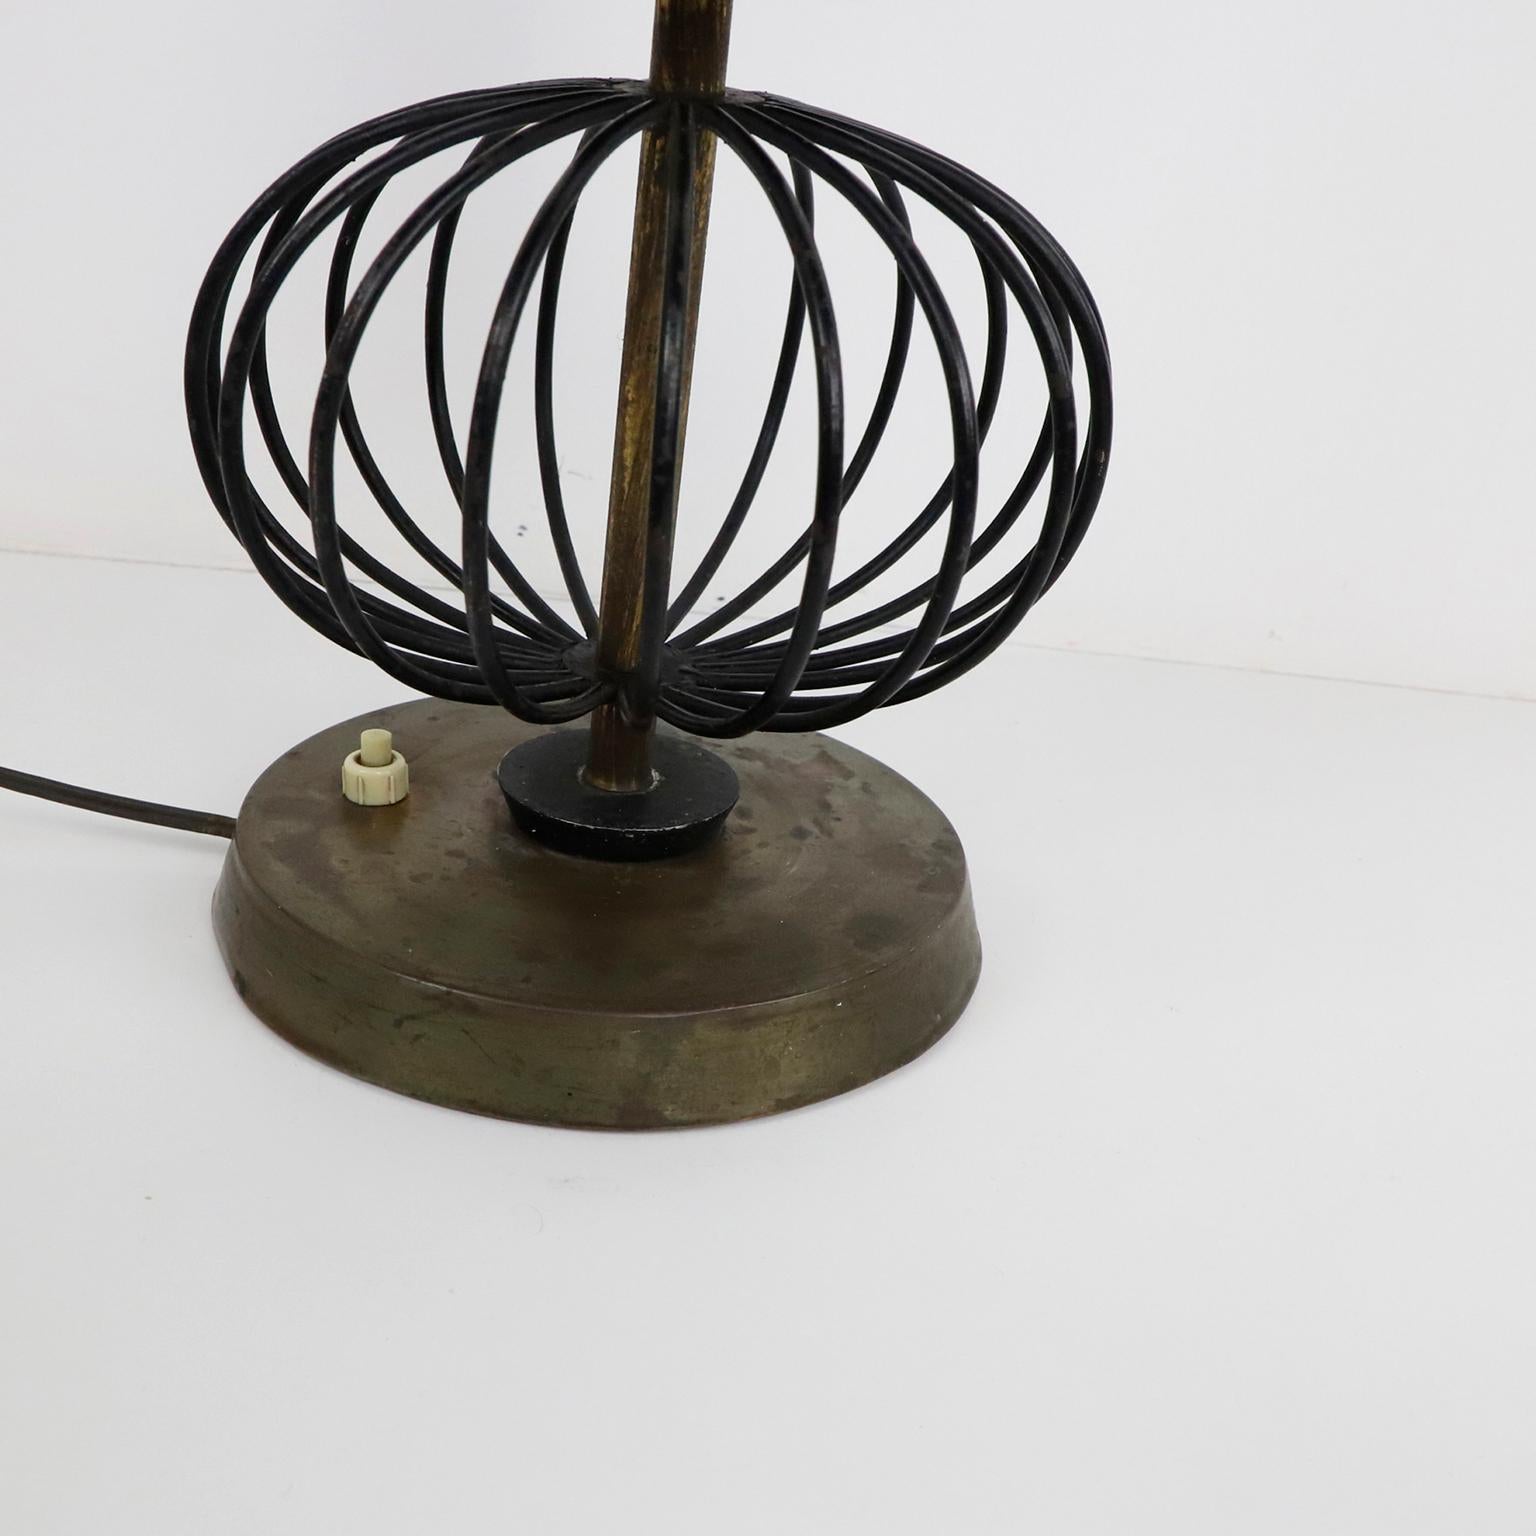 We offer this fantastic iron and brass lamp by Arturo Pani with amazing patina, circa 1950.